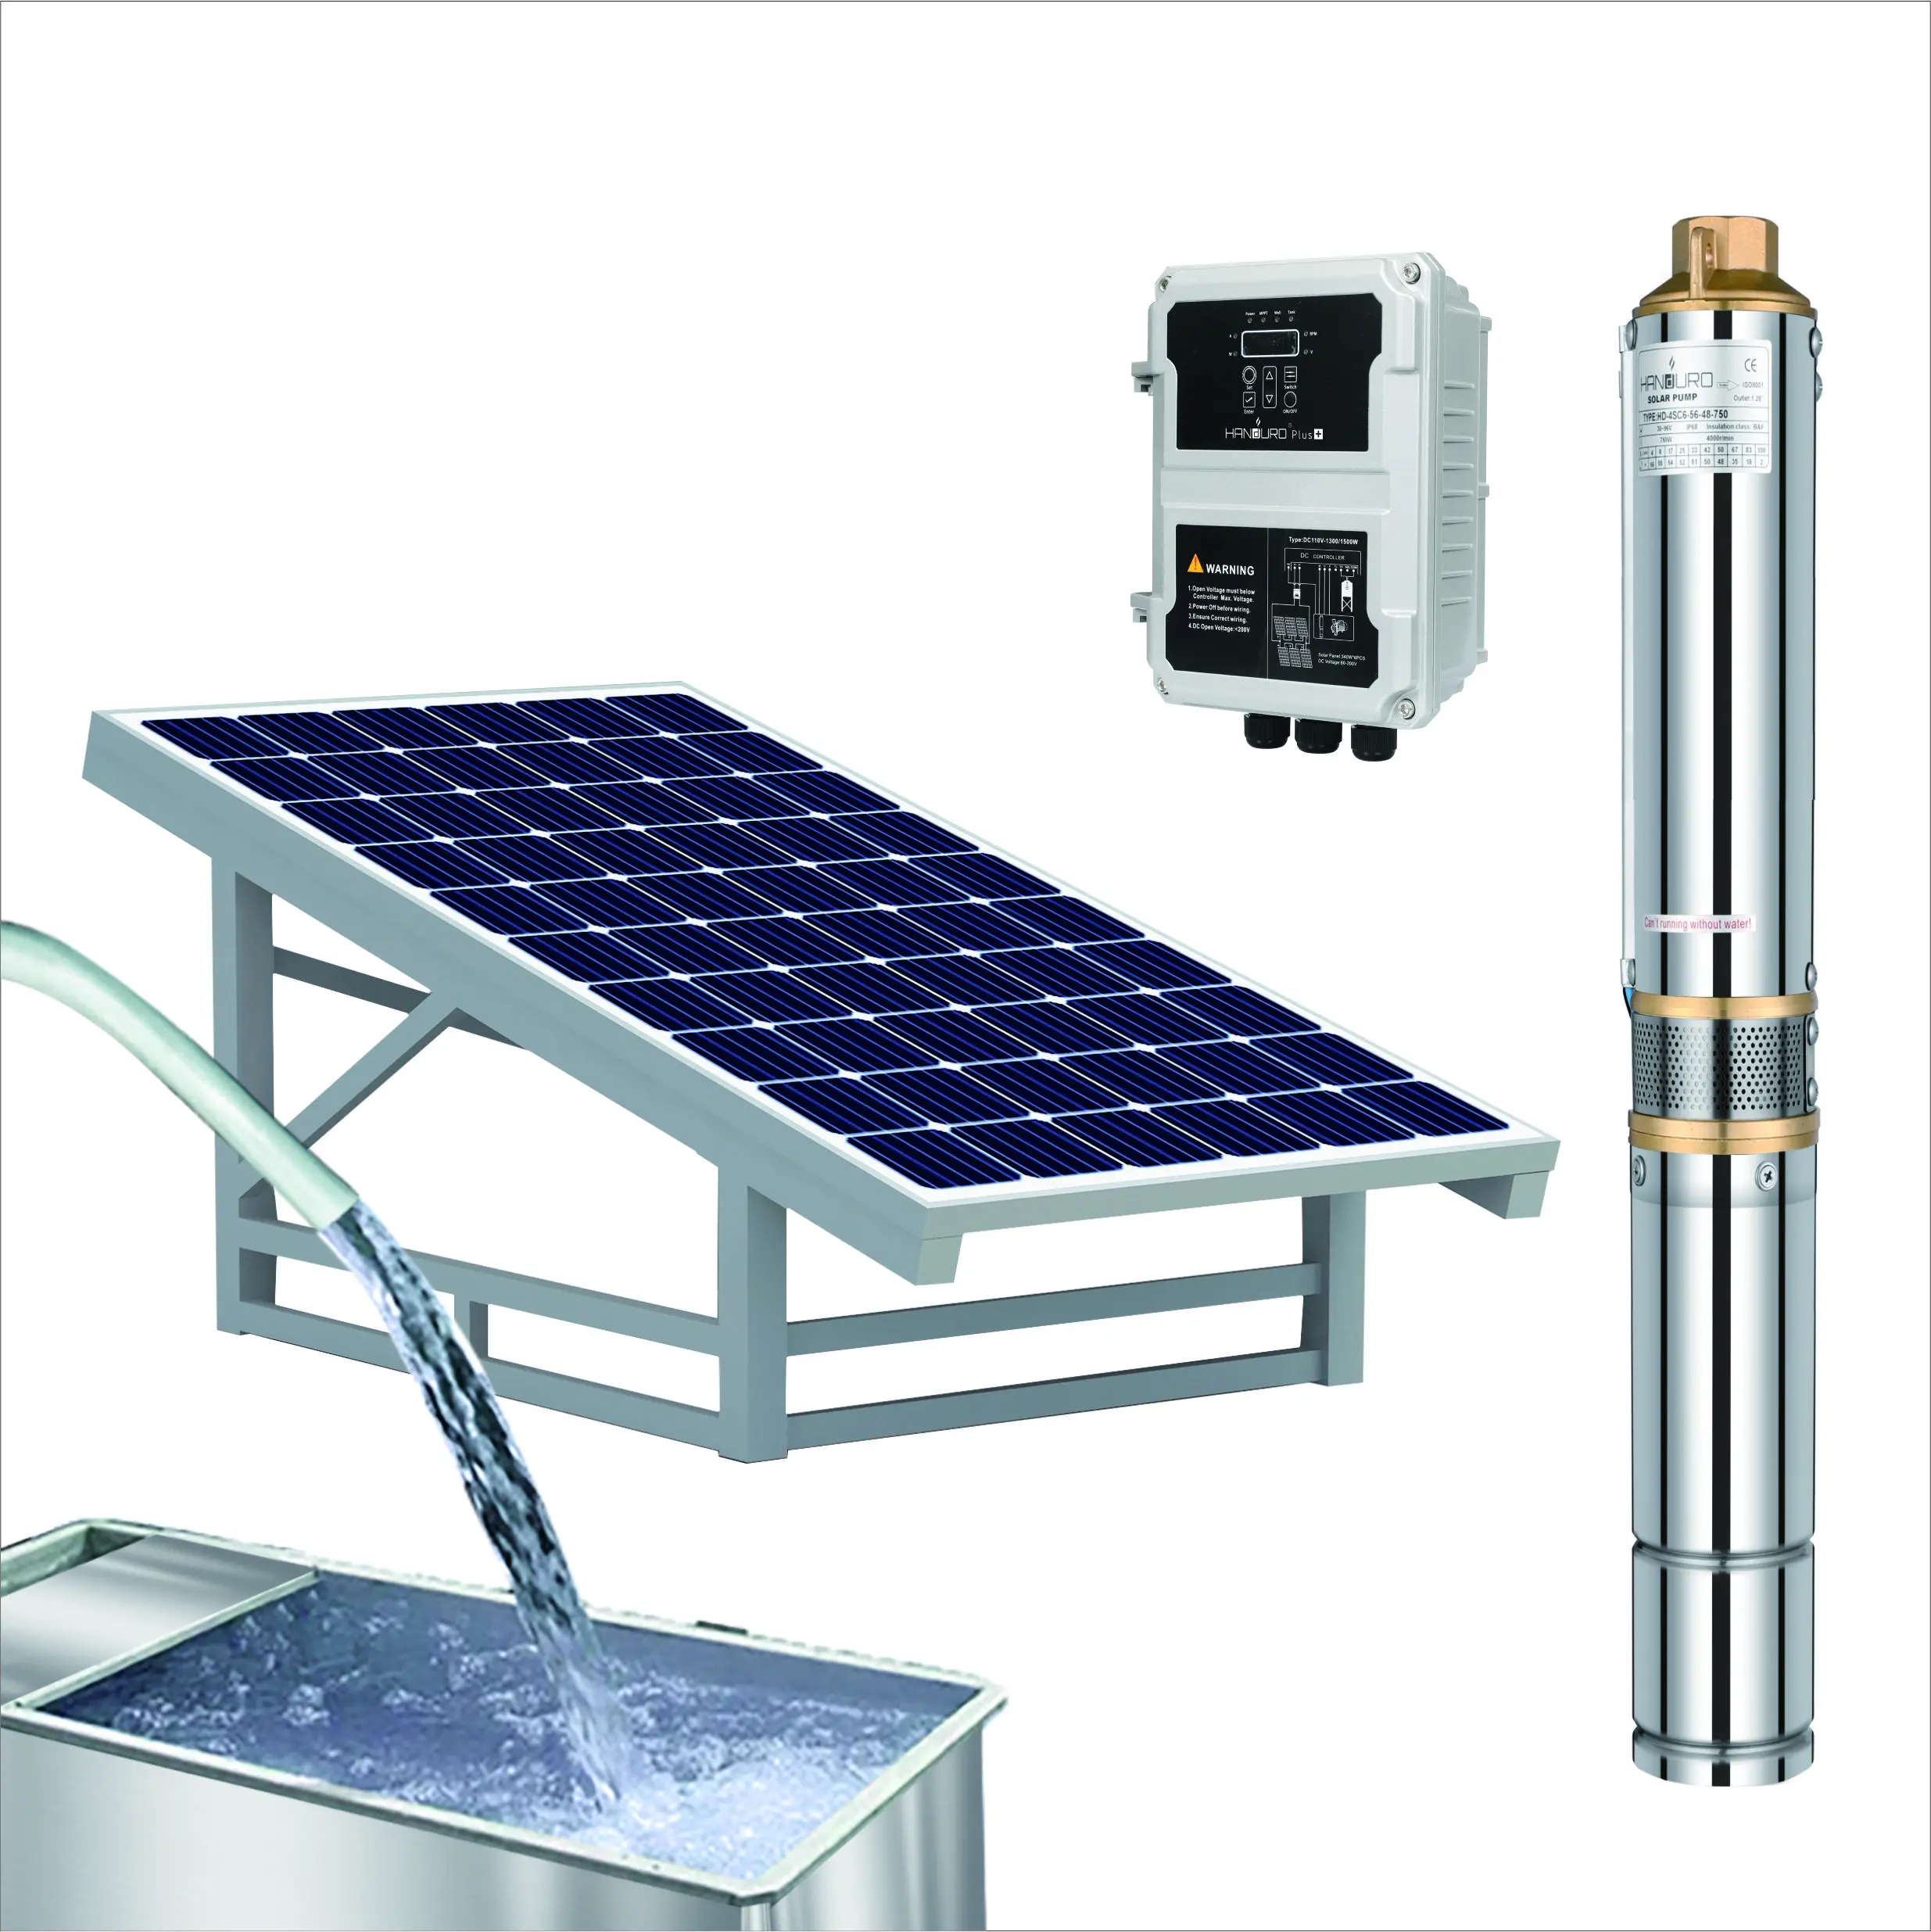 72v 600w 3.8m0.8/h 80m 24v 400w 5kw Solar Water Pump 75hp Full Kit Water Pump Solar - Buy Solar Water Pump,Water Pump Solar,24v 400w Solar Water Product on Alibaba.com